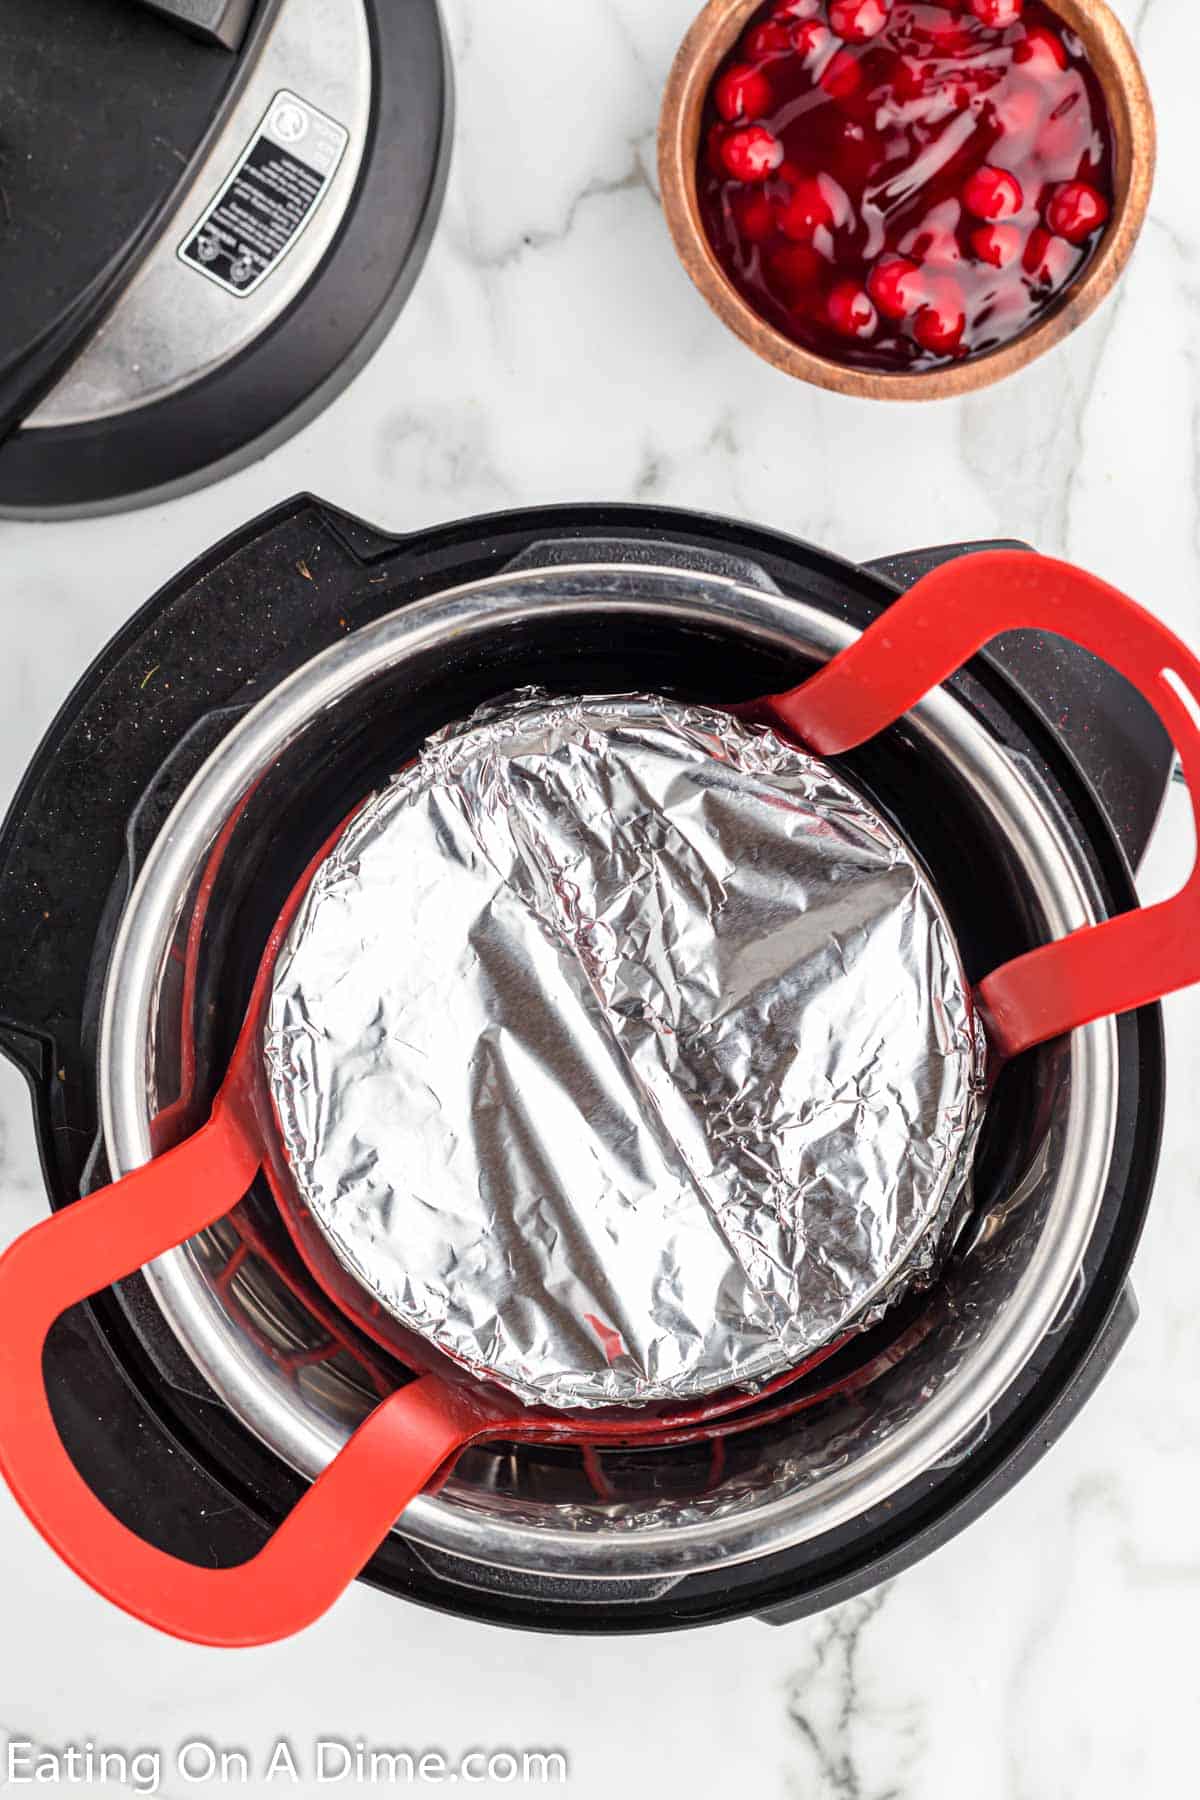 Placing the pan in the instant pot covered with foil 